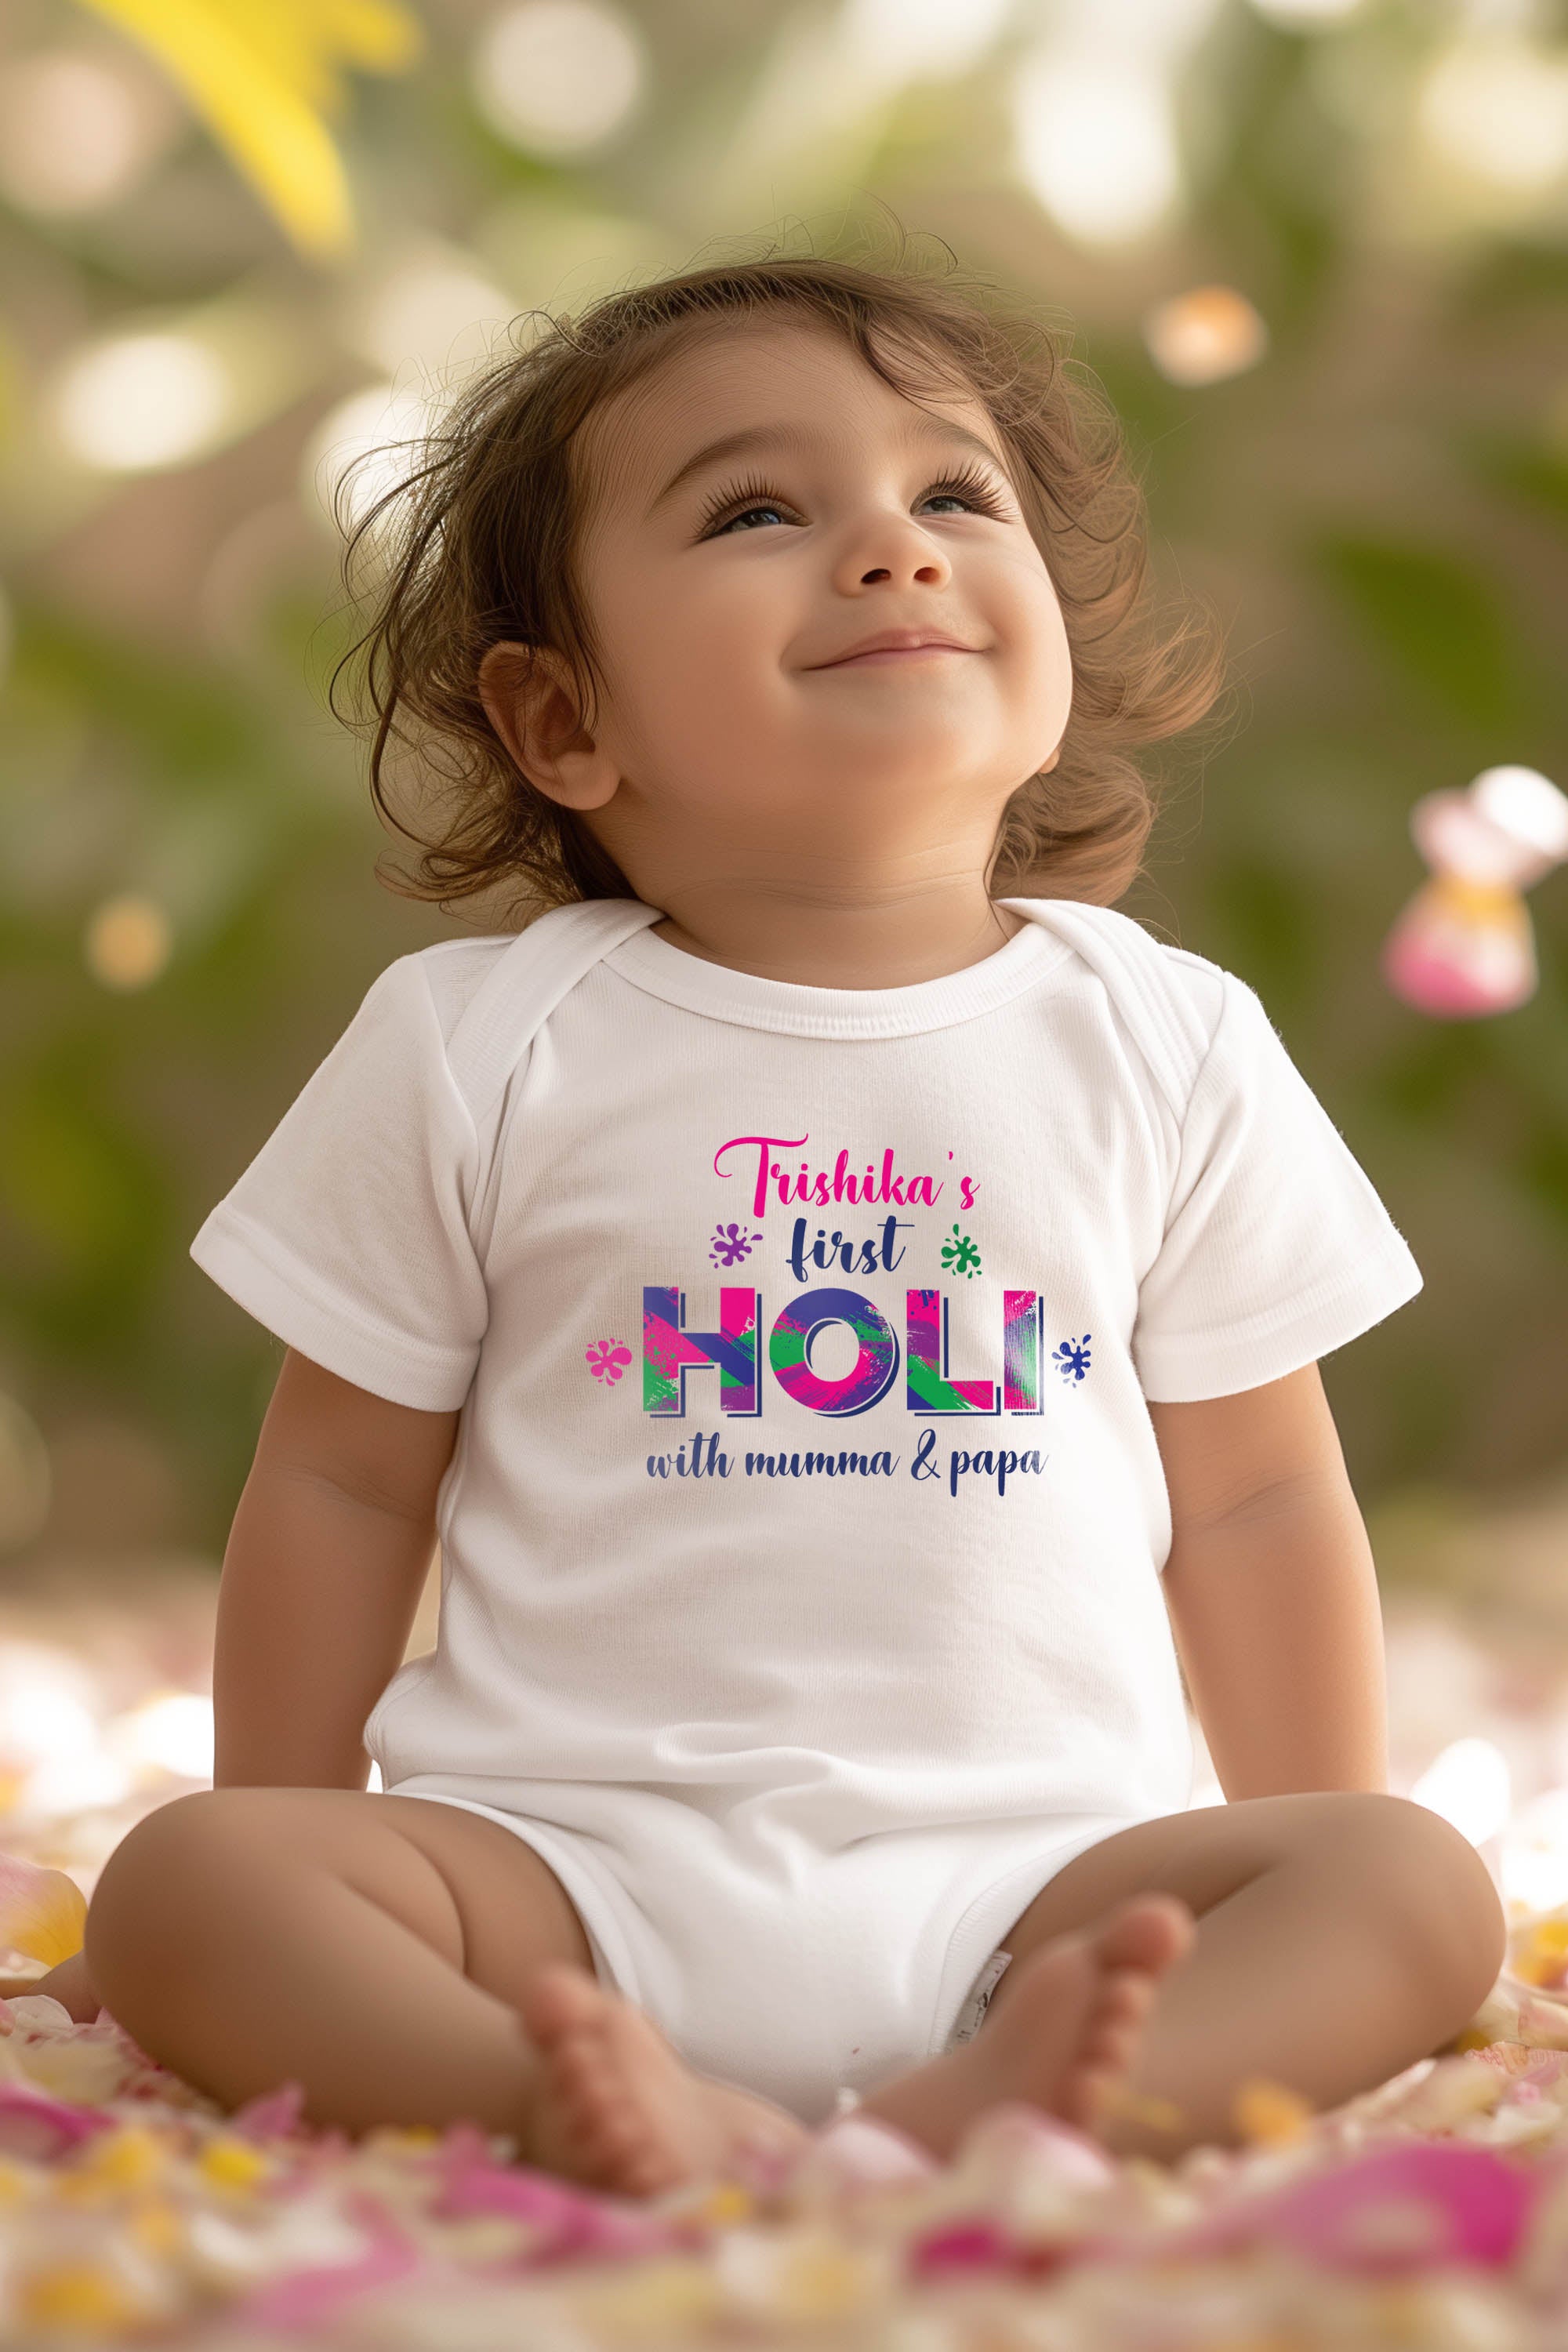 Buy Funcart My First Holi Baby Romper Size 20x17 Inches(9-12 Months) White  at Amazon.in